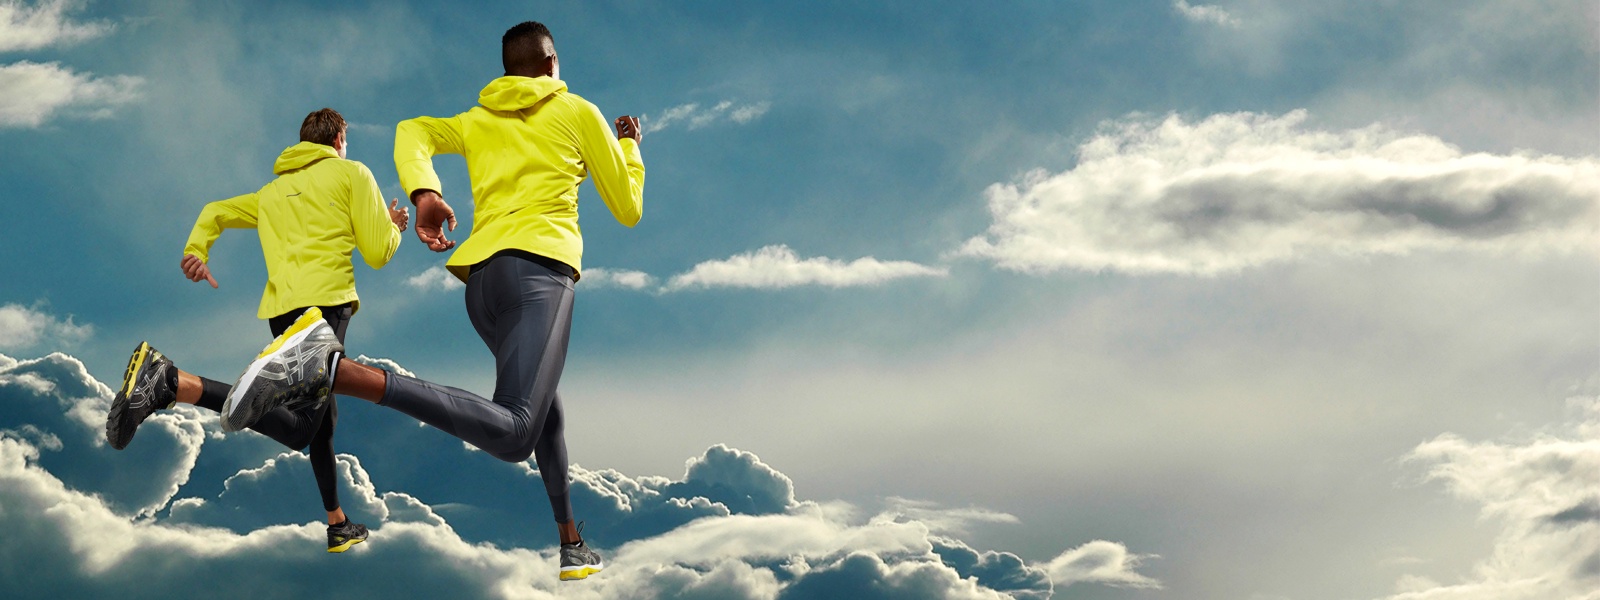 Man and woman in running gear running on clouds.